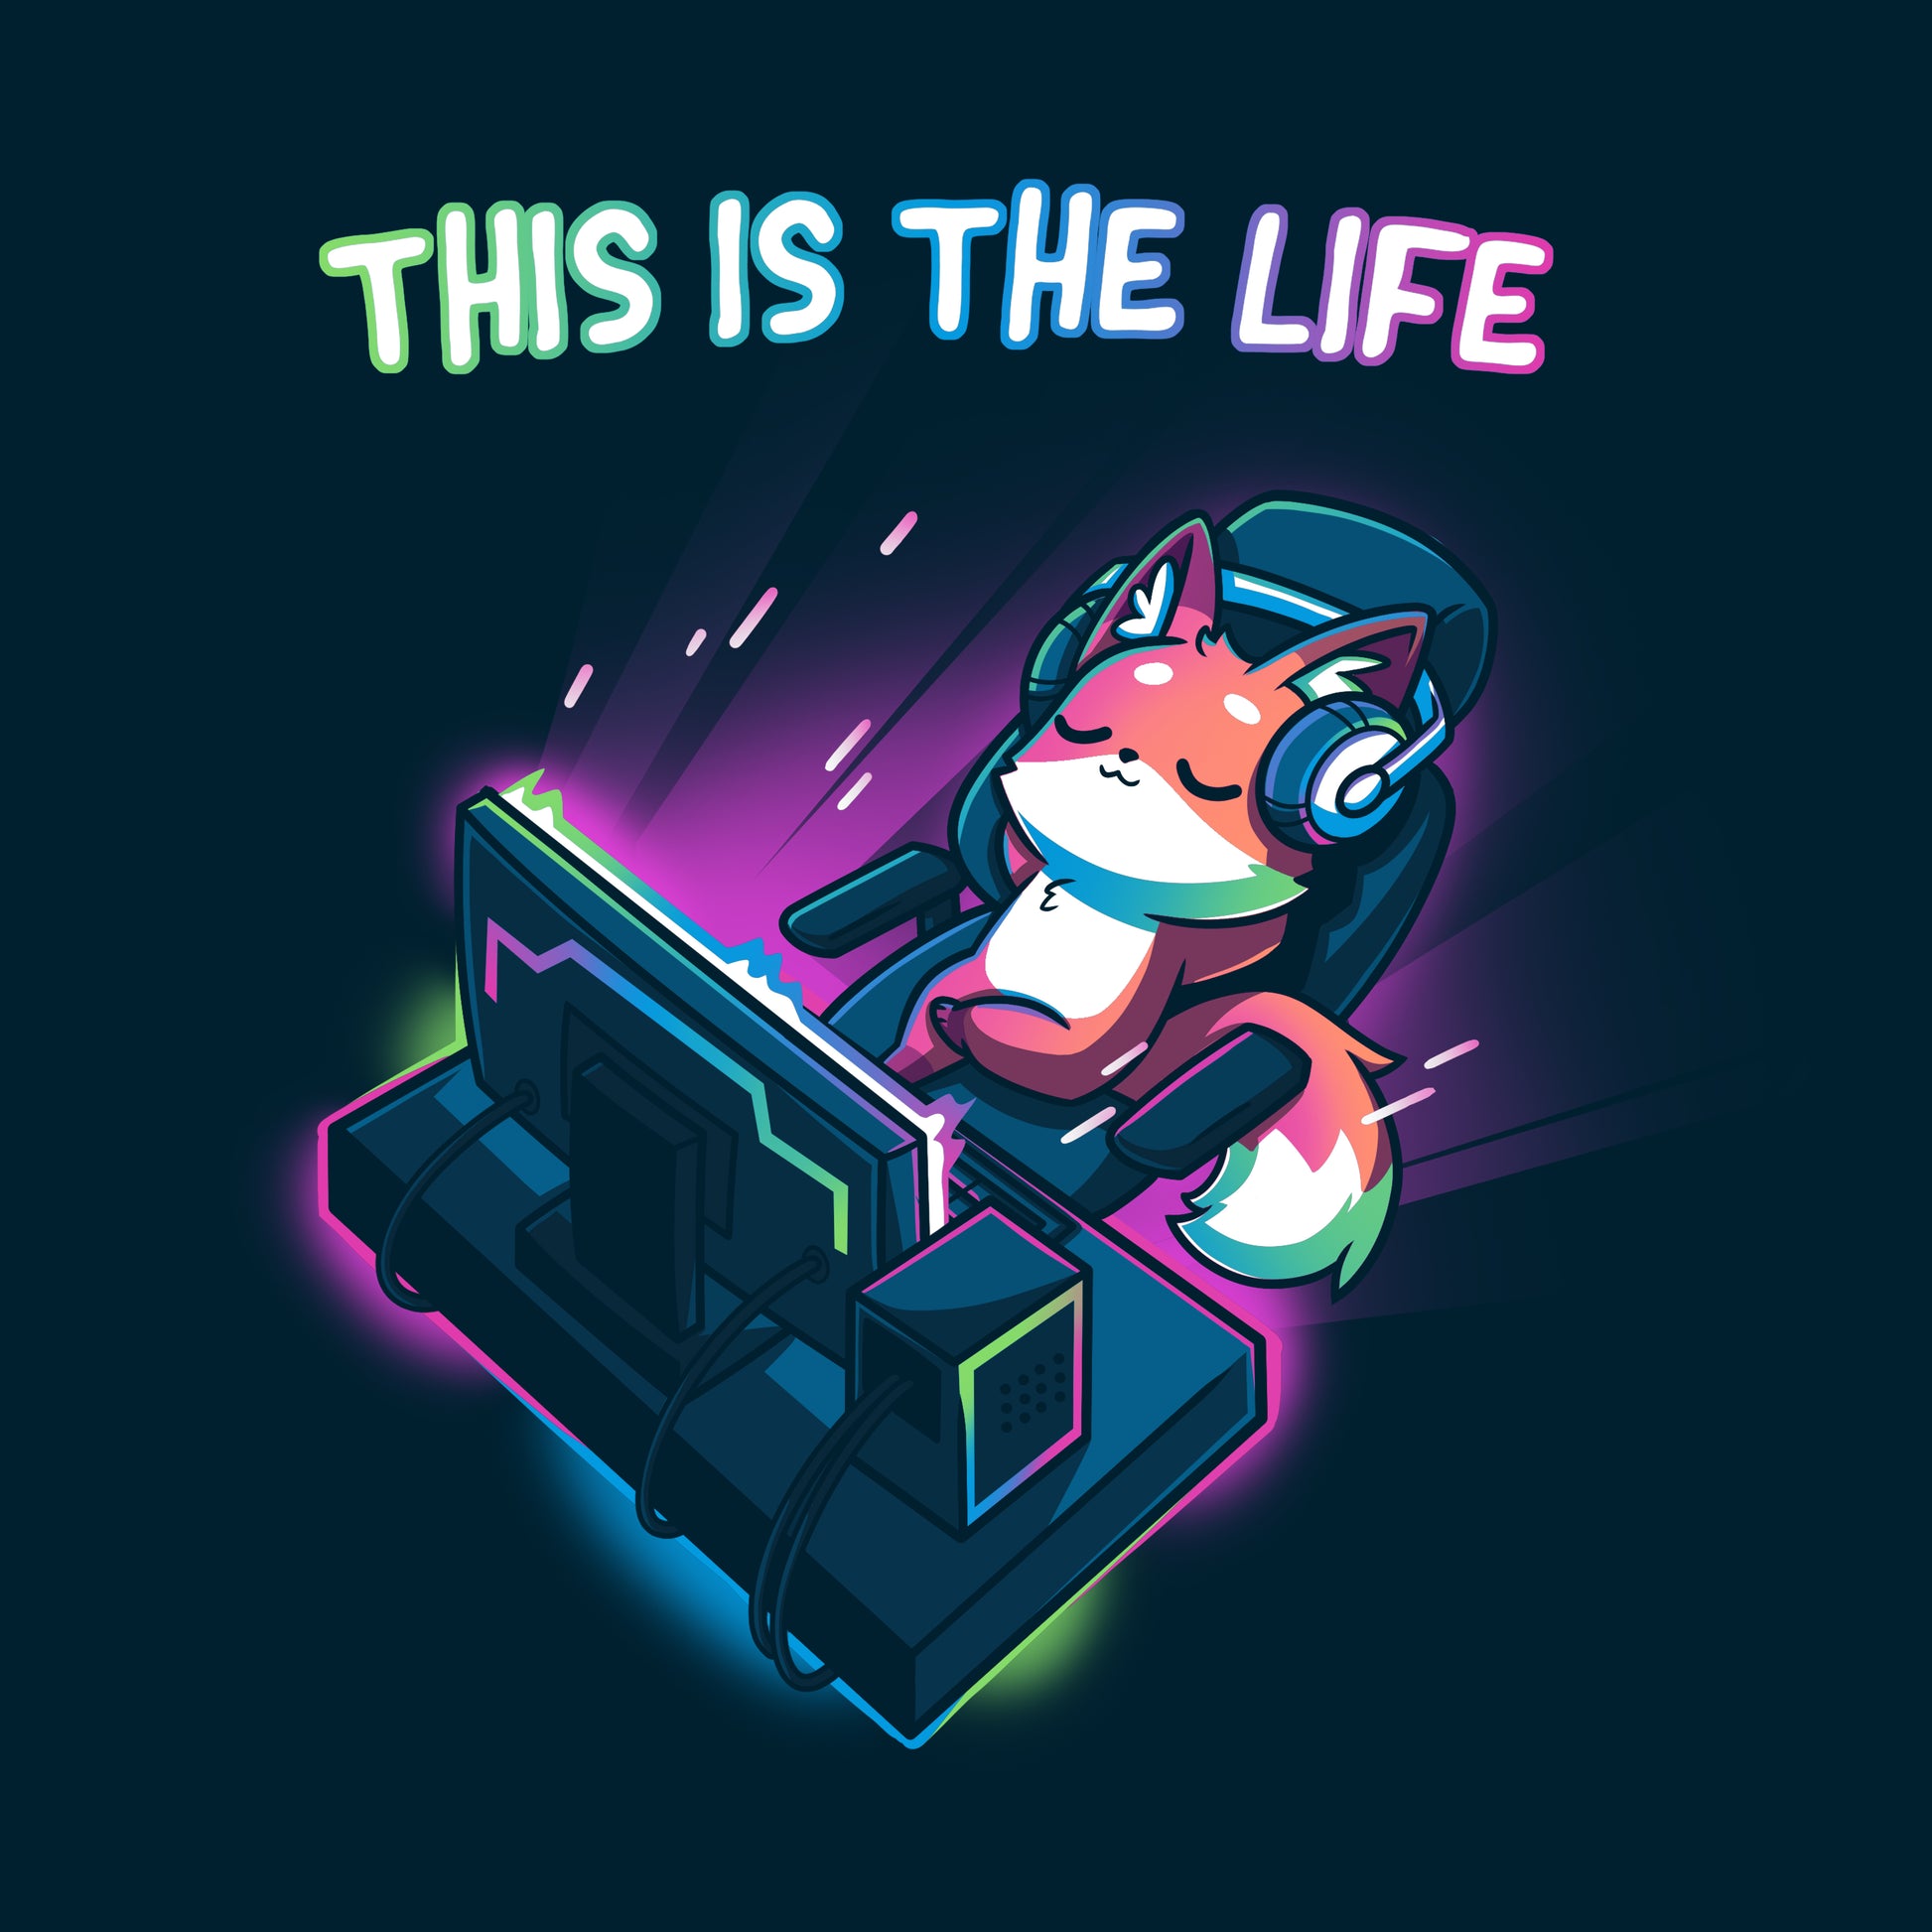 A cartoon fox wearing headphones, donned in a navy blue monsterdigital gaming t-shirt called "This Is the Life," reclines in a gaming chair, playing on a computer with the text "THIS IS THE LIFE" above.